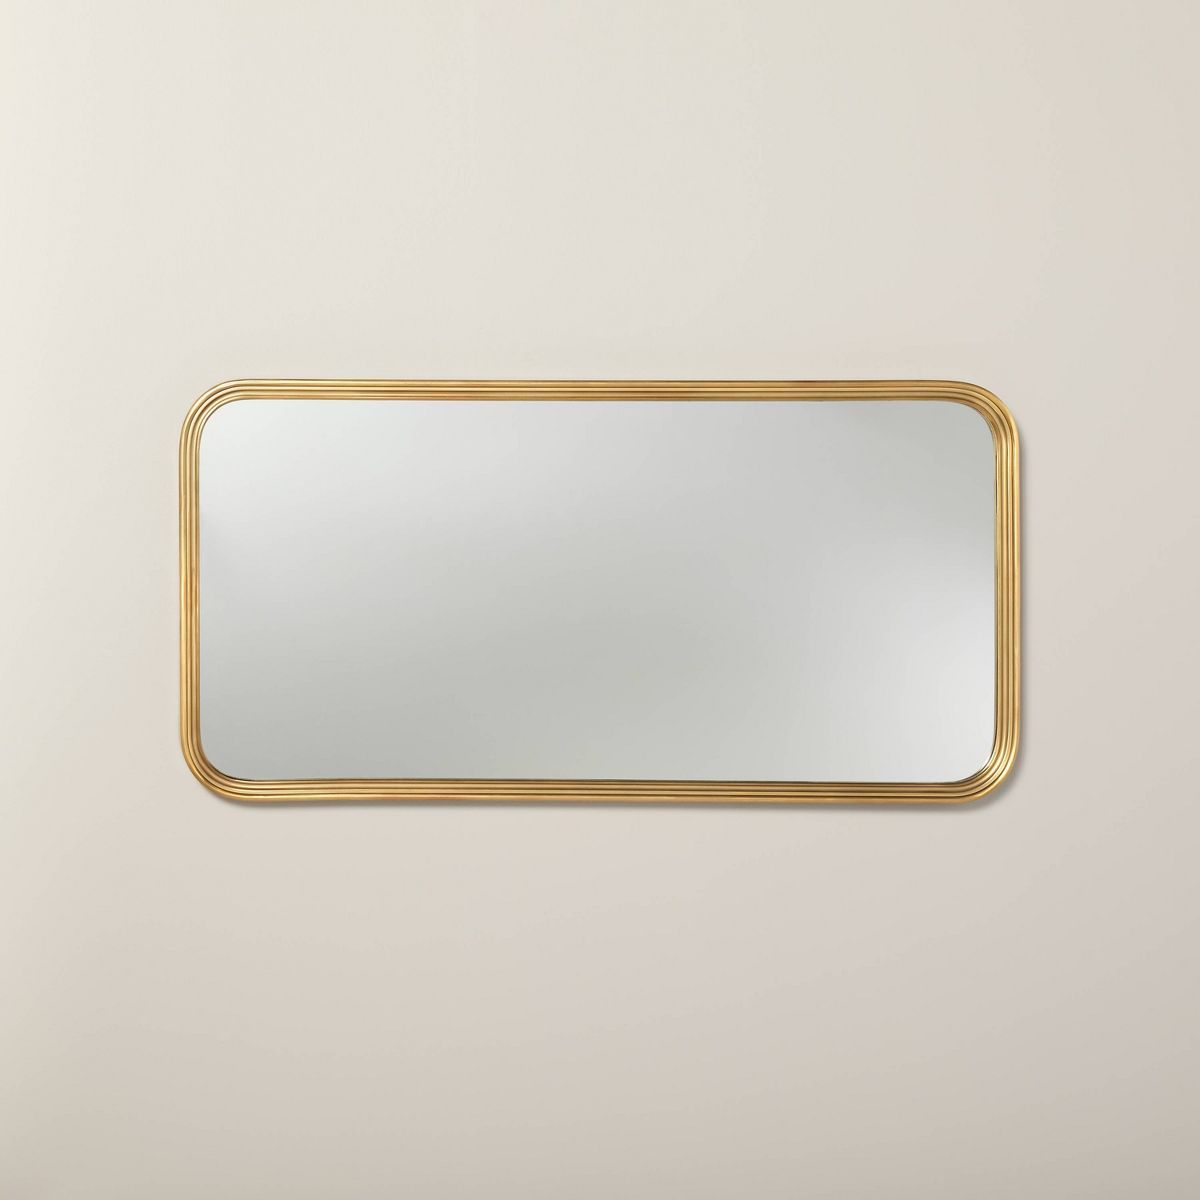 20"x40" Decorative Molding Rectangular Wall Mirror Antique Brass - Hearth & Hand™ with Magnolia | Target